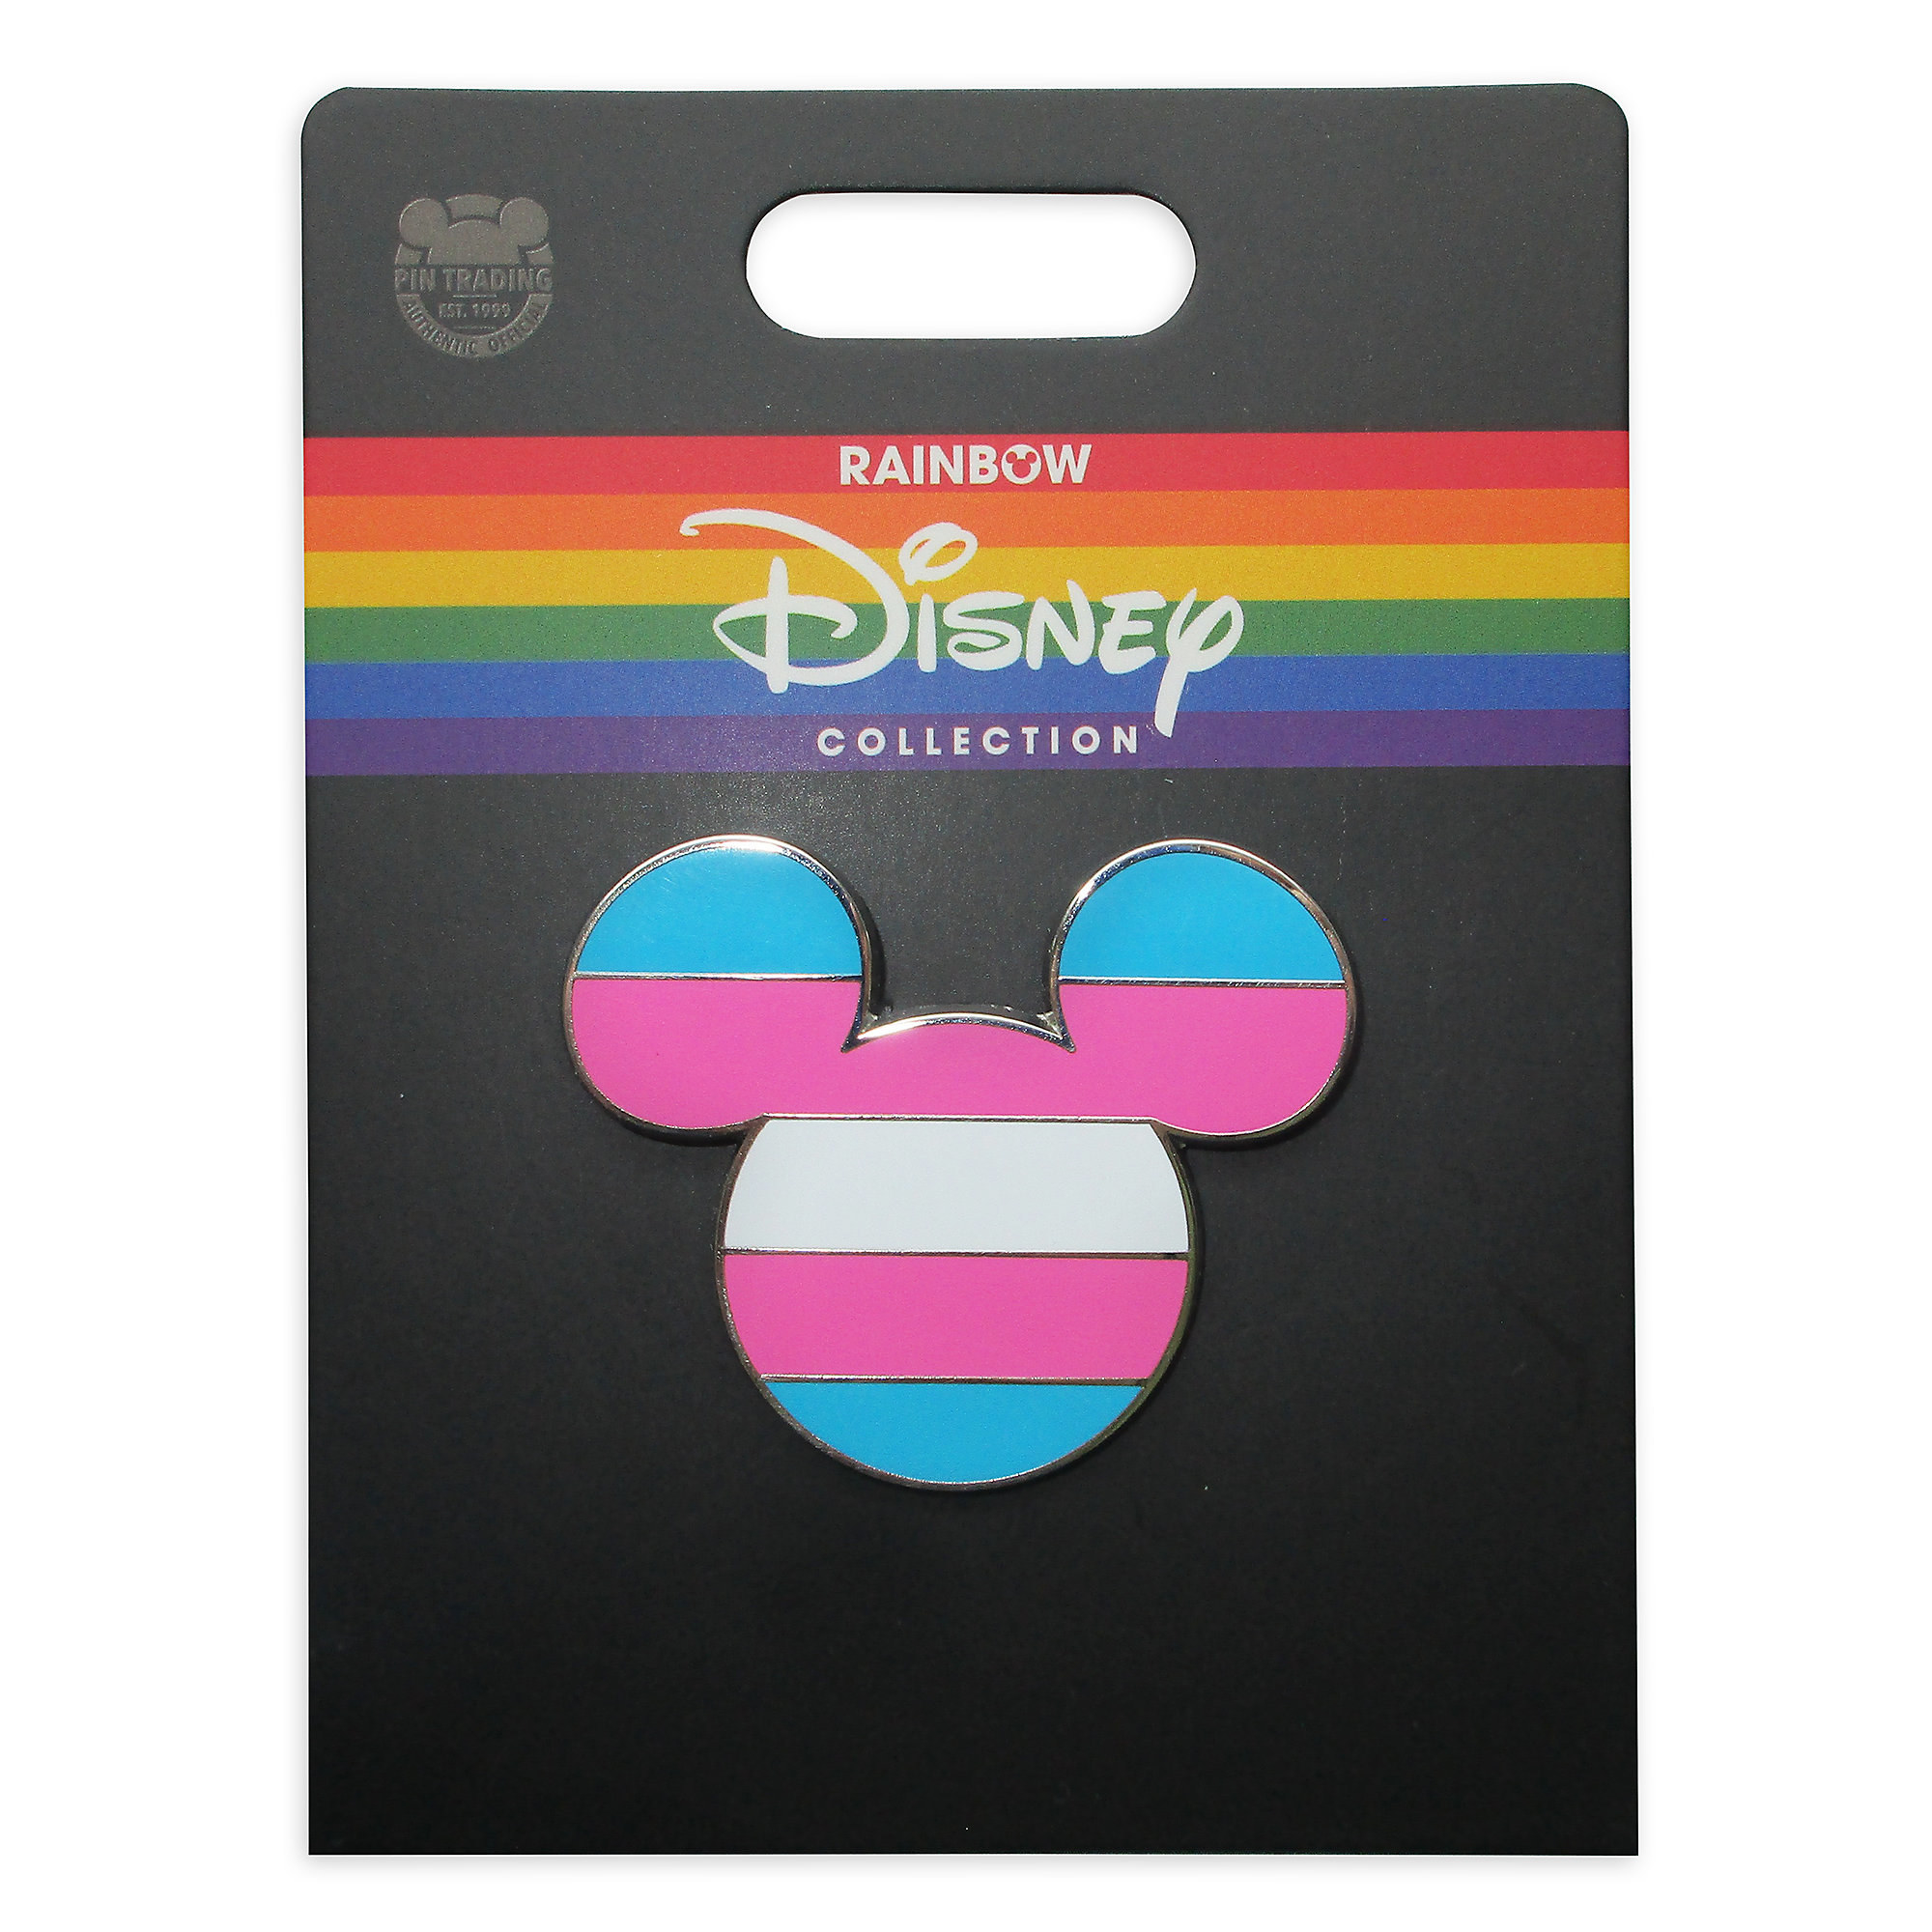 A mickey head shaped lapel pin with the transgender flag colors